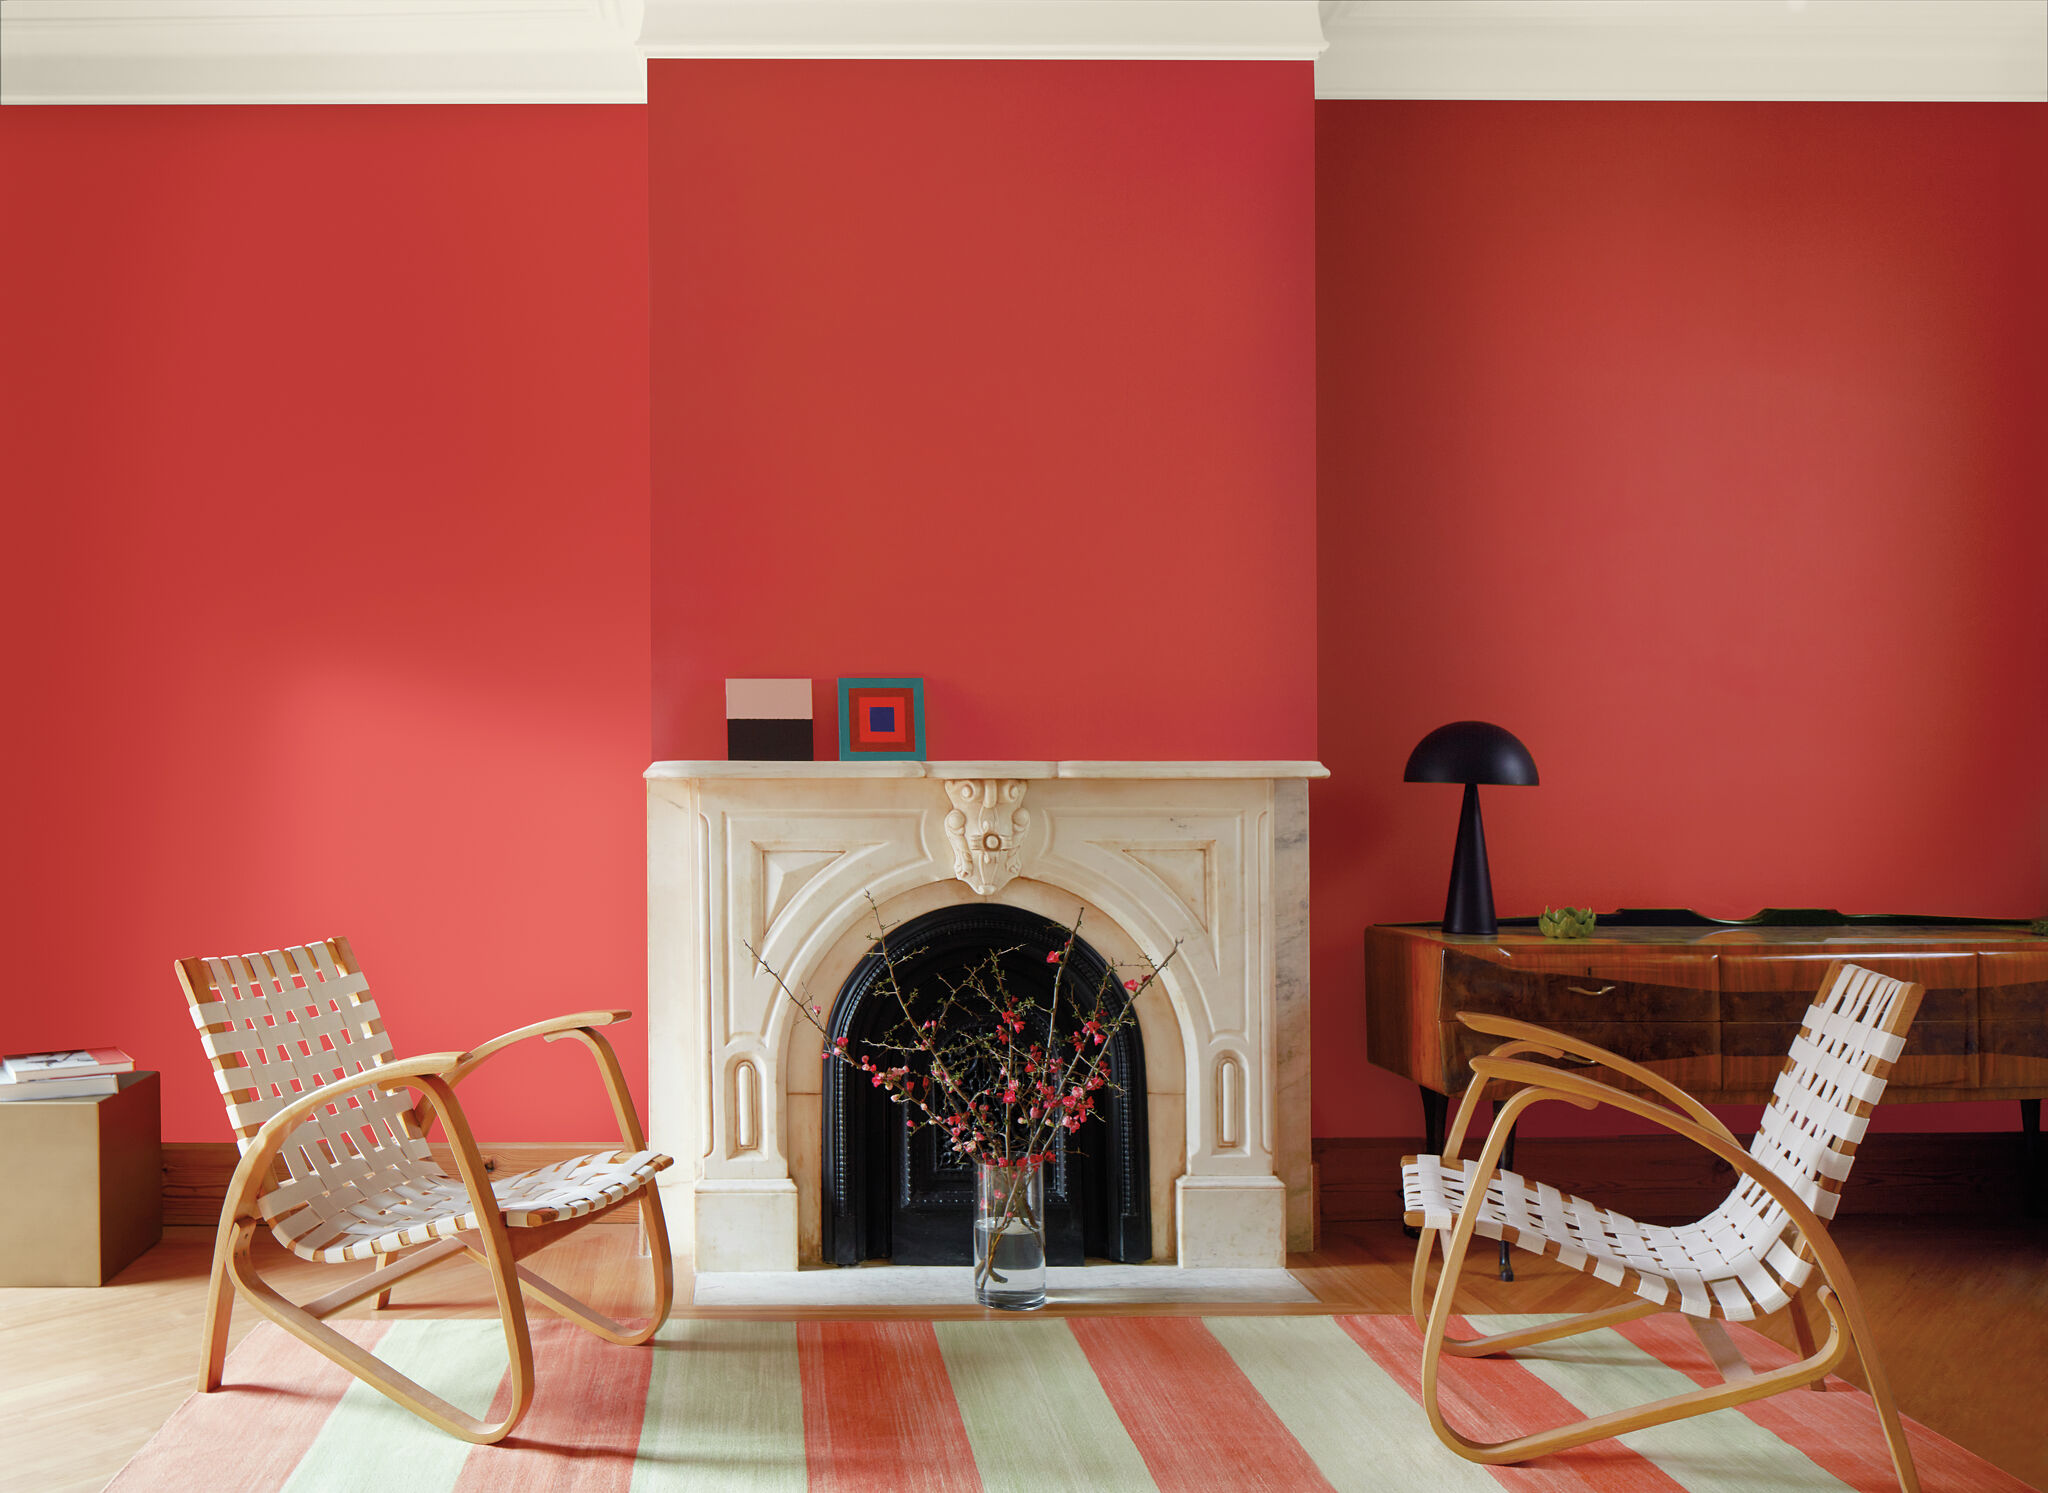 Benjamin Moore picks bold Raspberry Blush for its 2023 Color of the Year